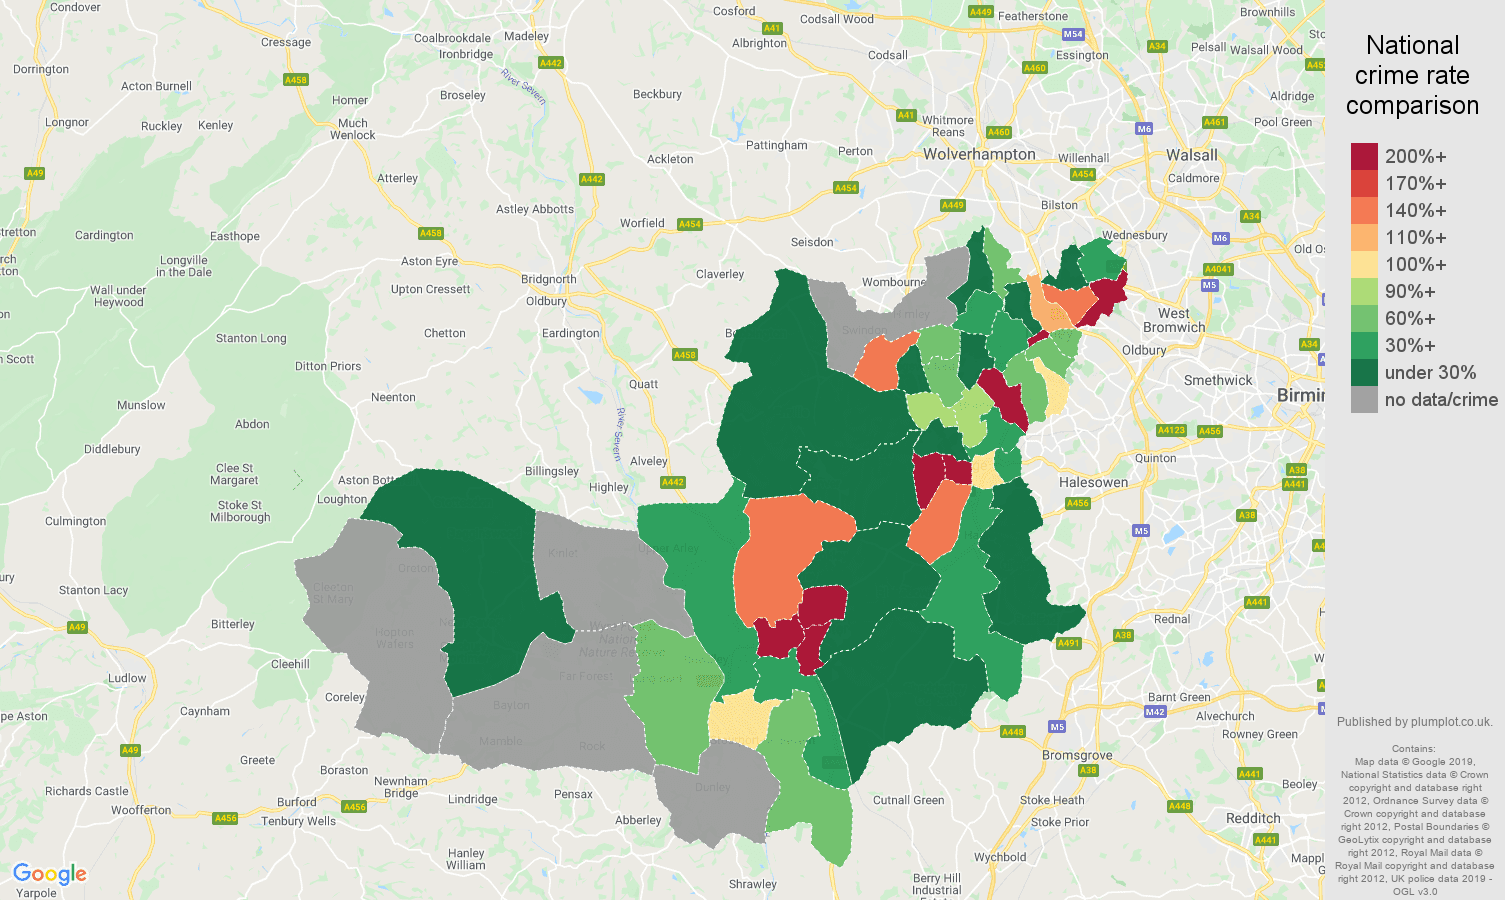 Dudley shoplifting crime rate comparison map